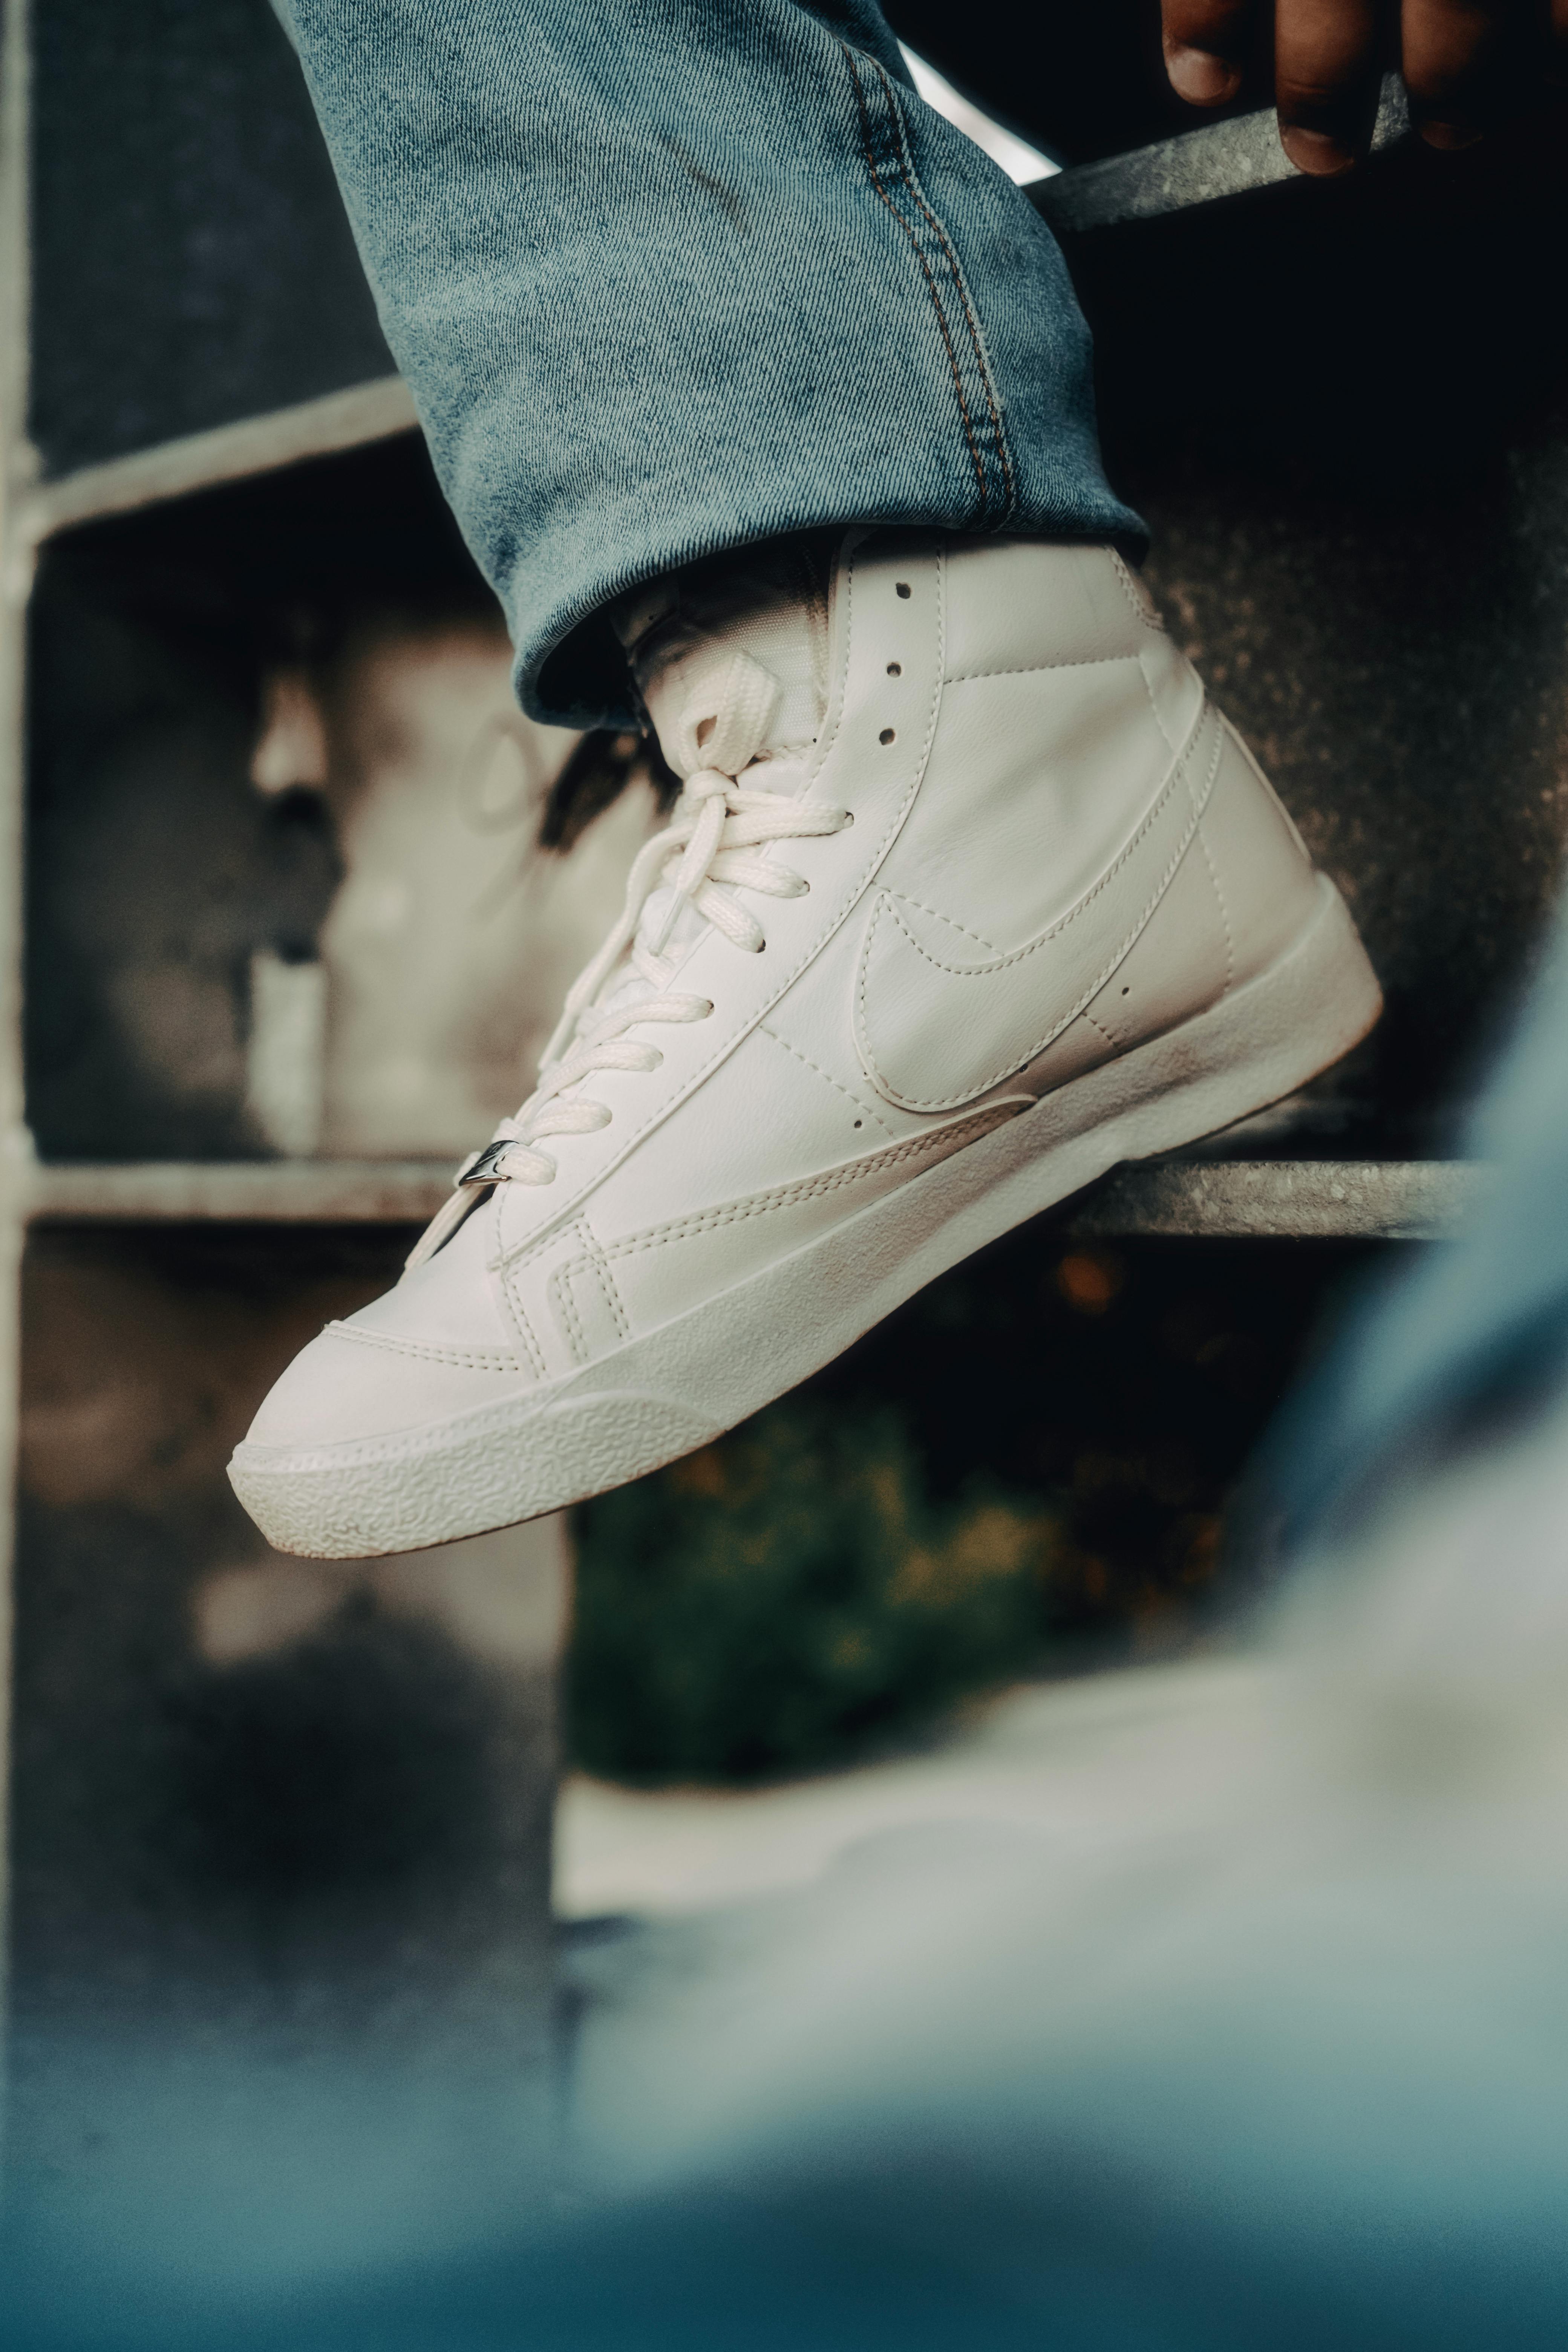 Unpaired Blue Nike Low-top Shoe · Free Stock Photo